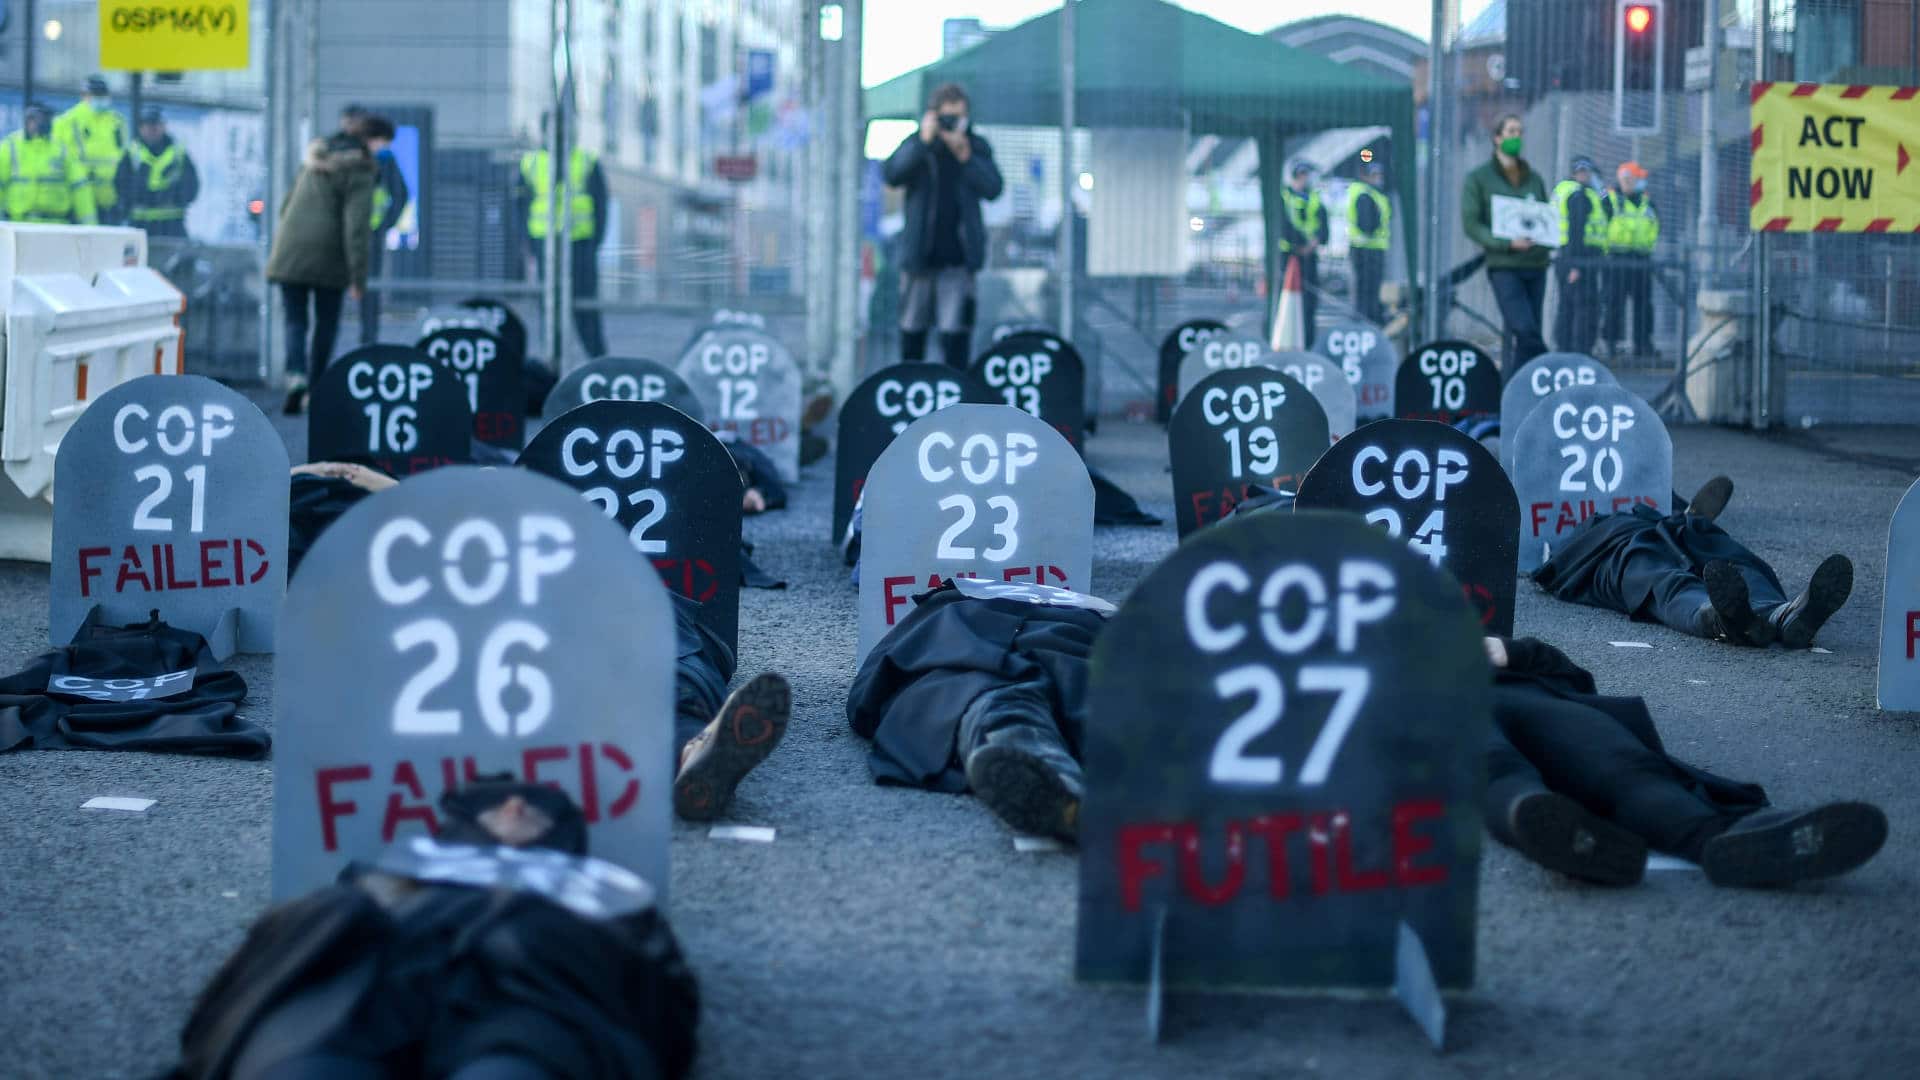 Extinction Rebellion protesters perform a die-in protest outside the entrance to the COP26 site on Nov. 13, 2021.